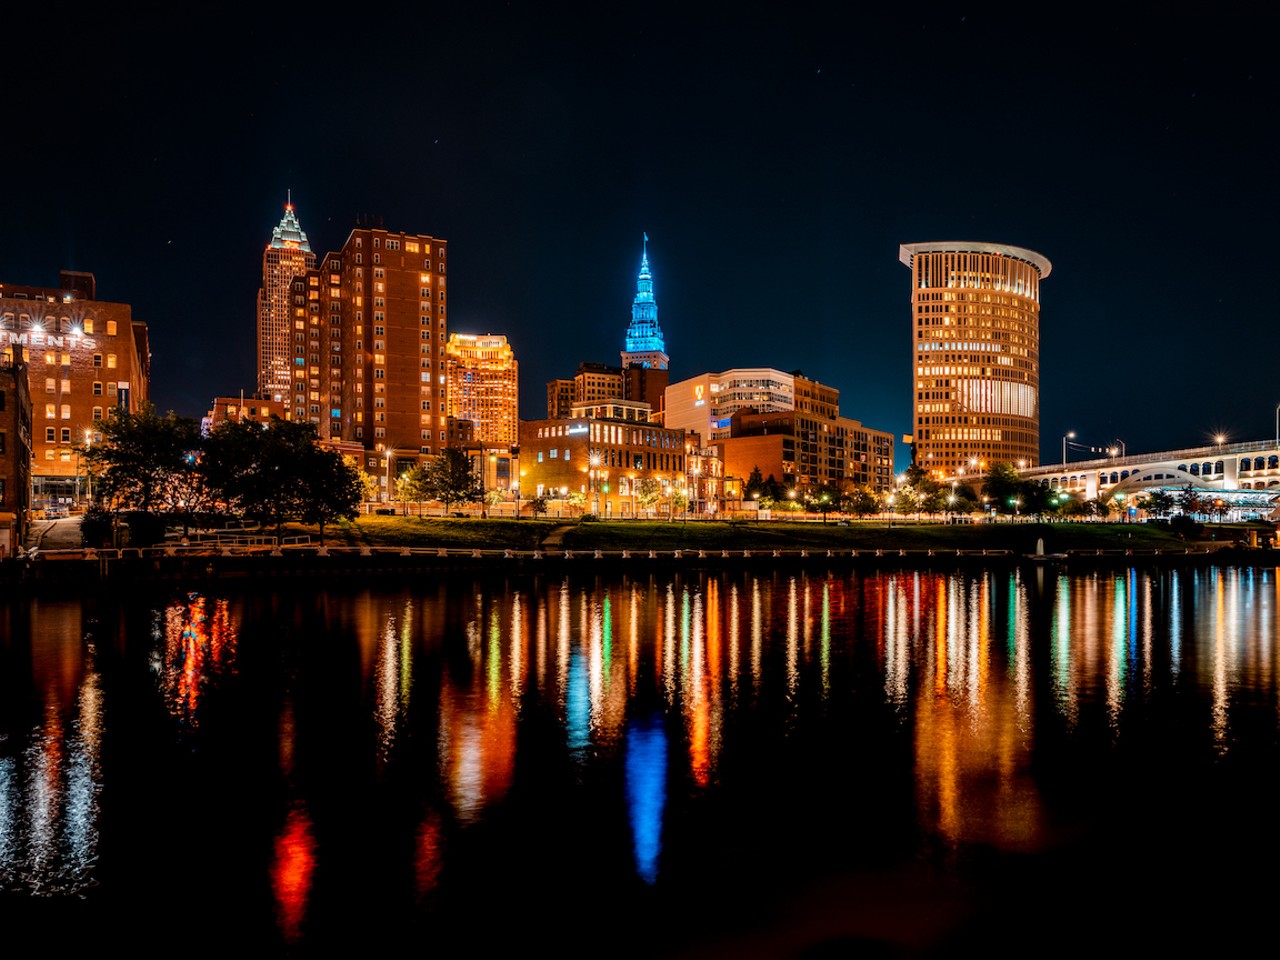 The Flats – West Bank: Although the East Bank of The Flats is known for its views and nightlife, the West Bank is no slouch in providing views of the Cleveland skyline. Catch activity from boaters and rowers on the water while you take in views of the city from the pier between Music Box Supper Club and Jacobs Pavilion.